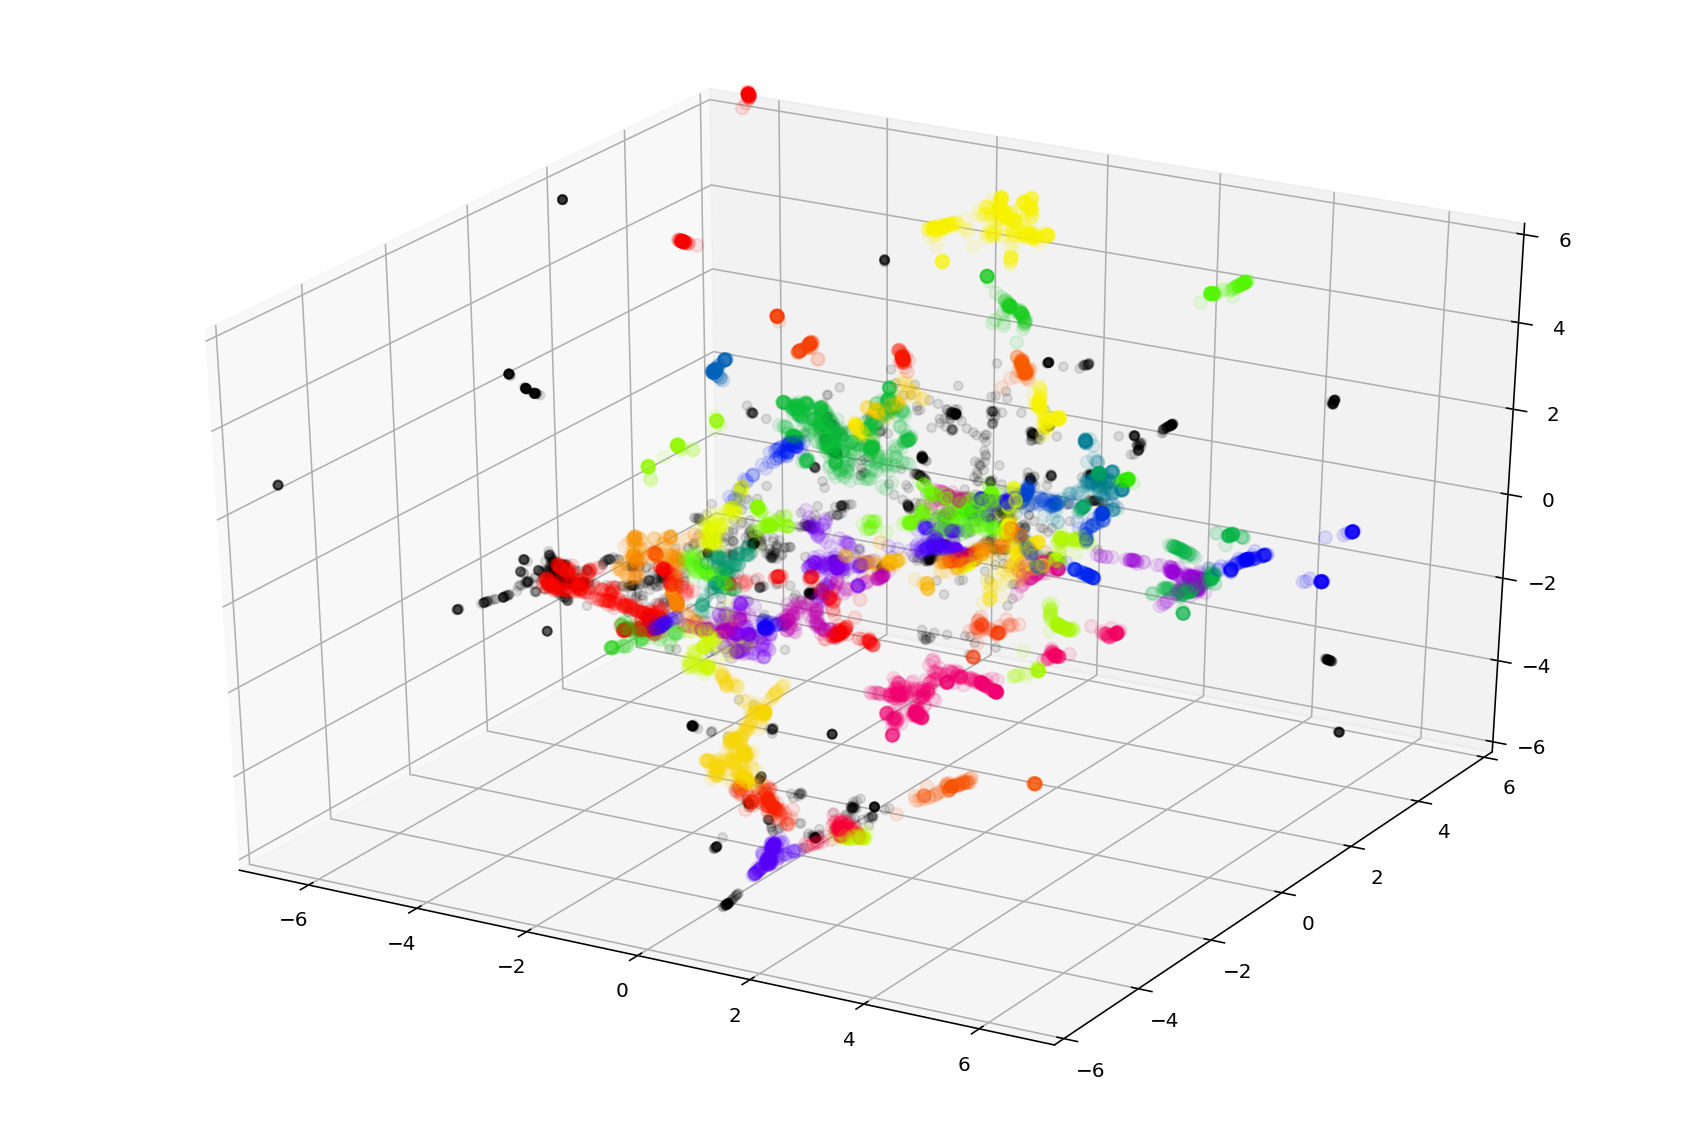 An example of tag clustering in 3D space. Different clusters are marked with different colors (colors are not unique and may be repeated for different clusters).